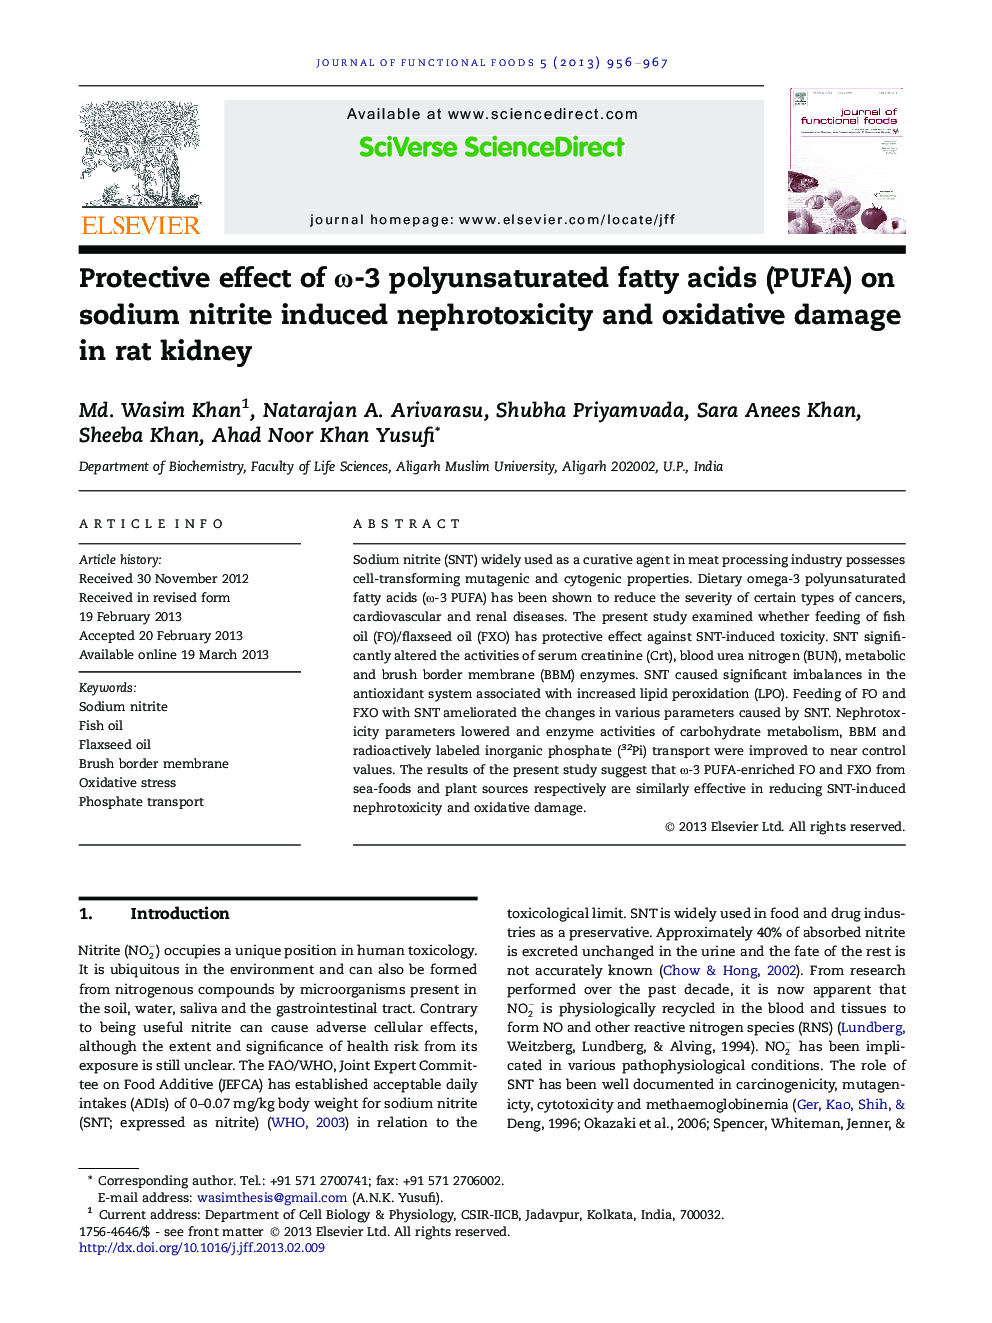 Protective effect of Ï-3 polyunsaturated fatty acids (PUFA) on sodium nitrite induced nephrotoxicity and oxidative damage in rat kidney